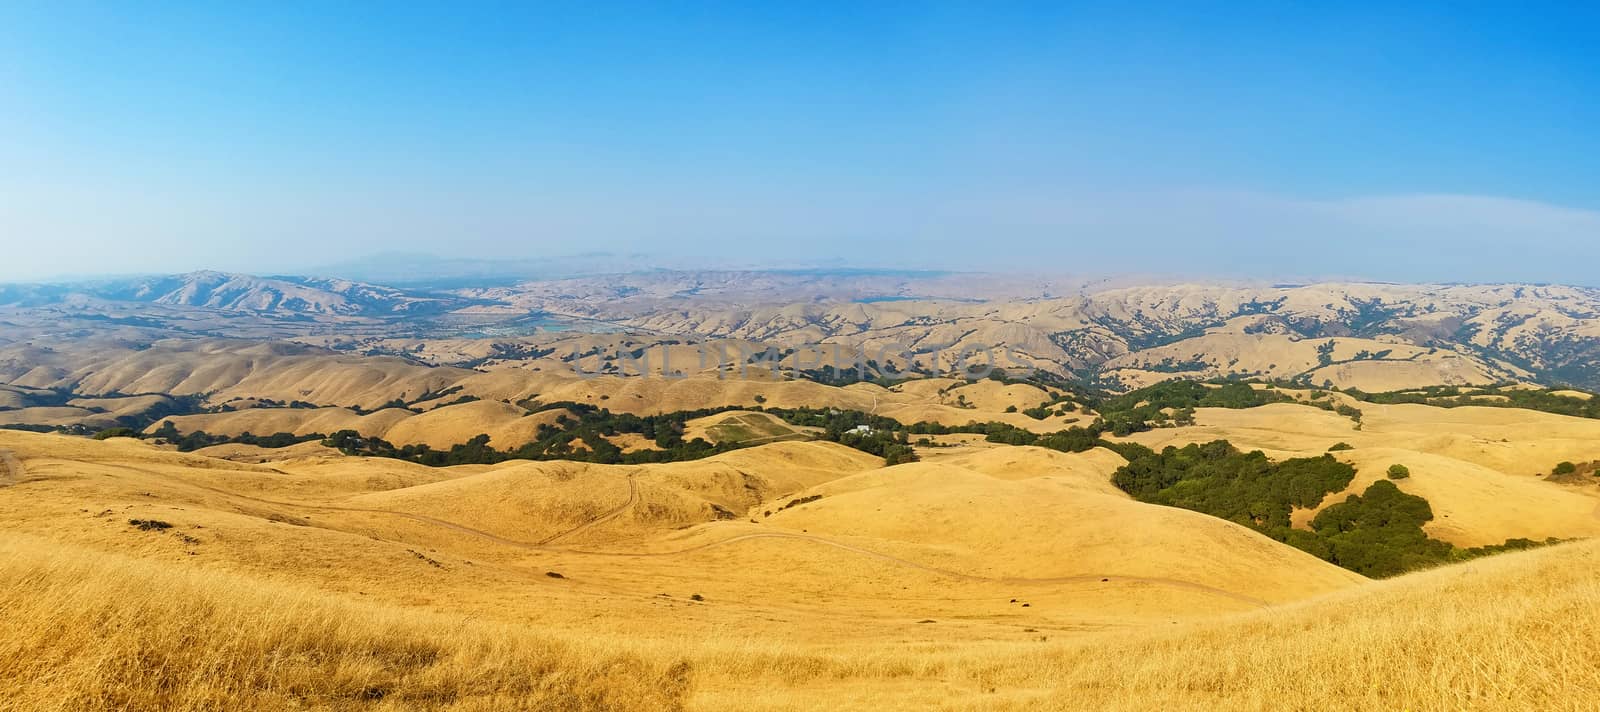 California landscape in August. View from the Mission Peak, the end of one of the most popular hiking trails in San Francisco Bay Area. The camera is pointed towards North-East.